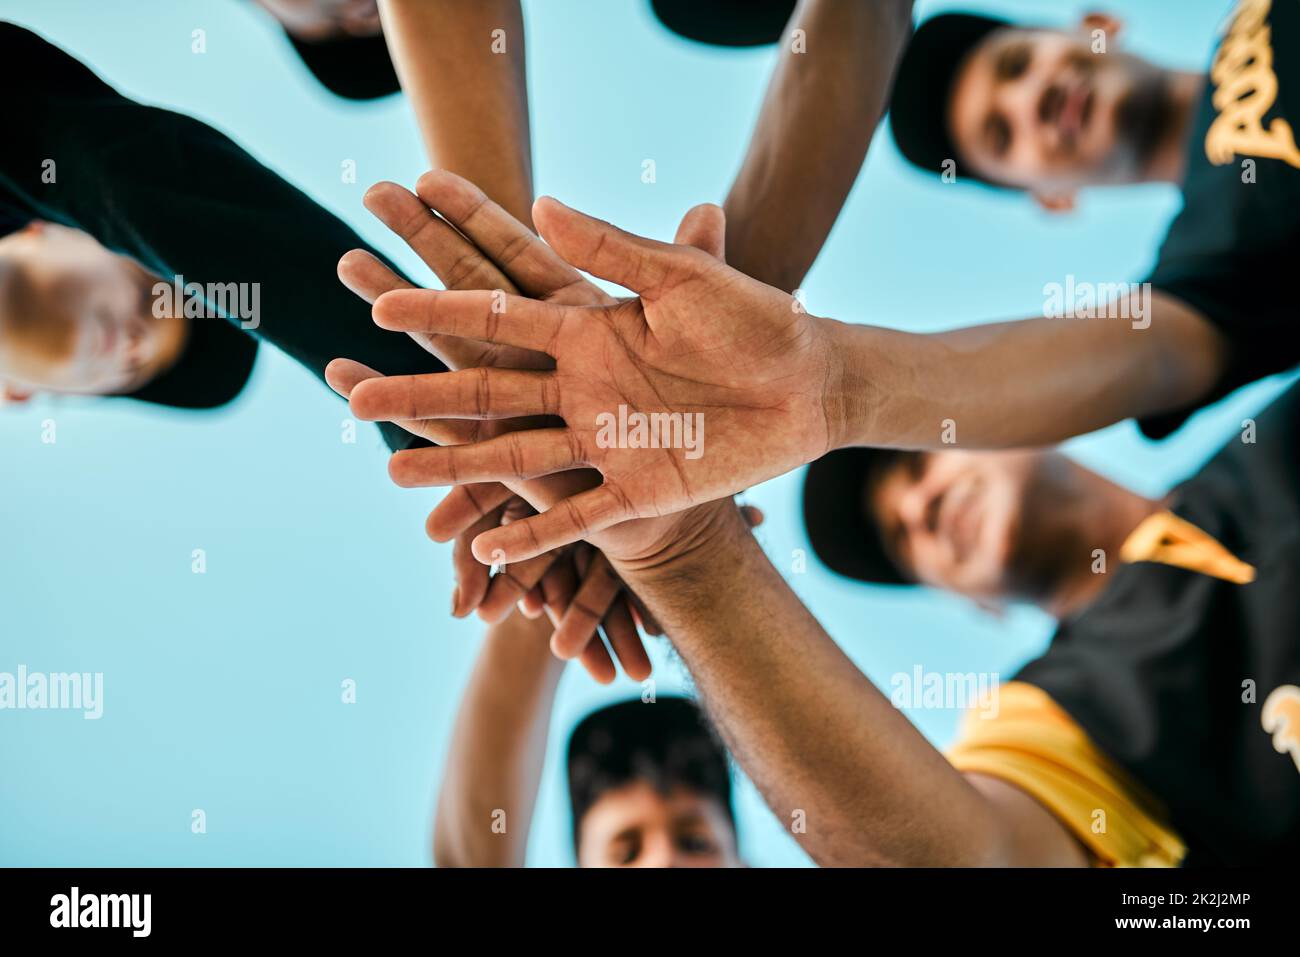 Every player plays a large role. Shot of a team of young baseball players joining their hands together in a huddle during a game. Stock Photo